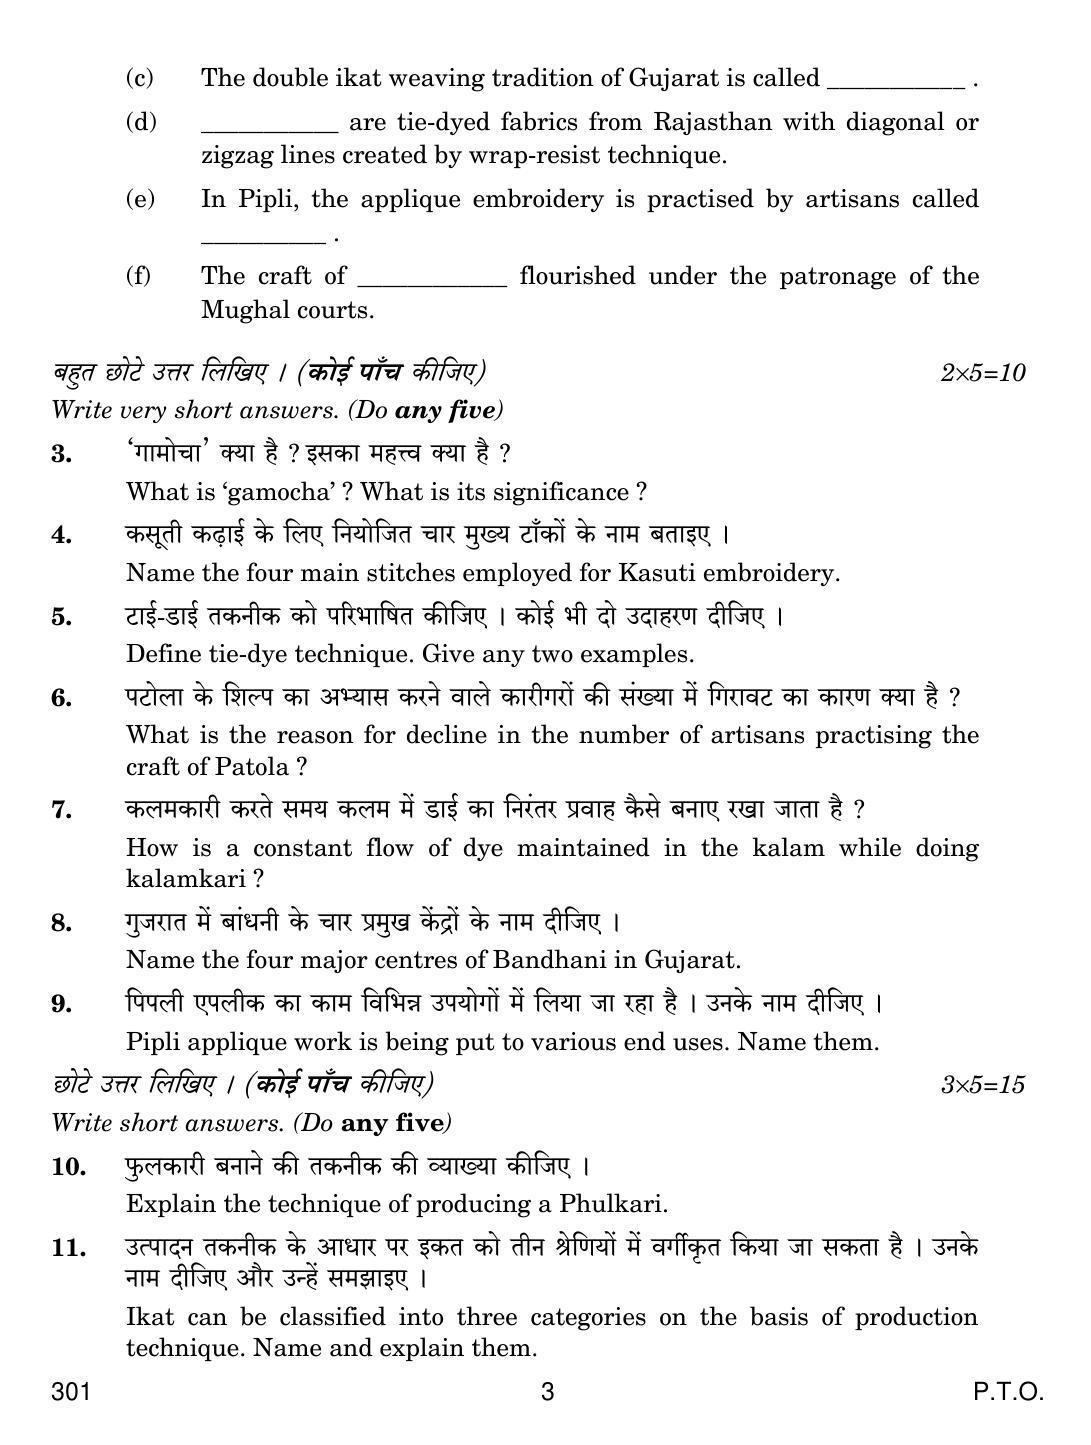 CBSE Class 12 301 Traditional Indian Textiles 2019 Question Paper - Page 3